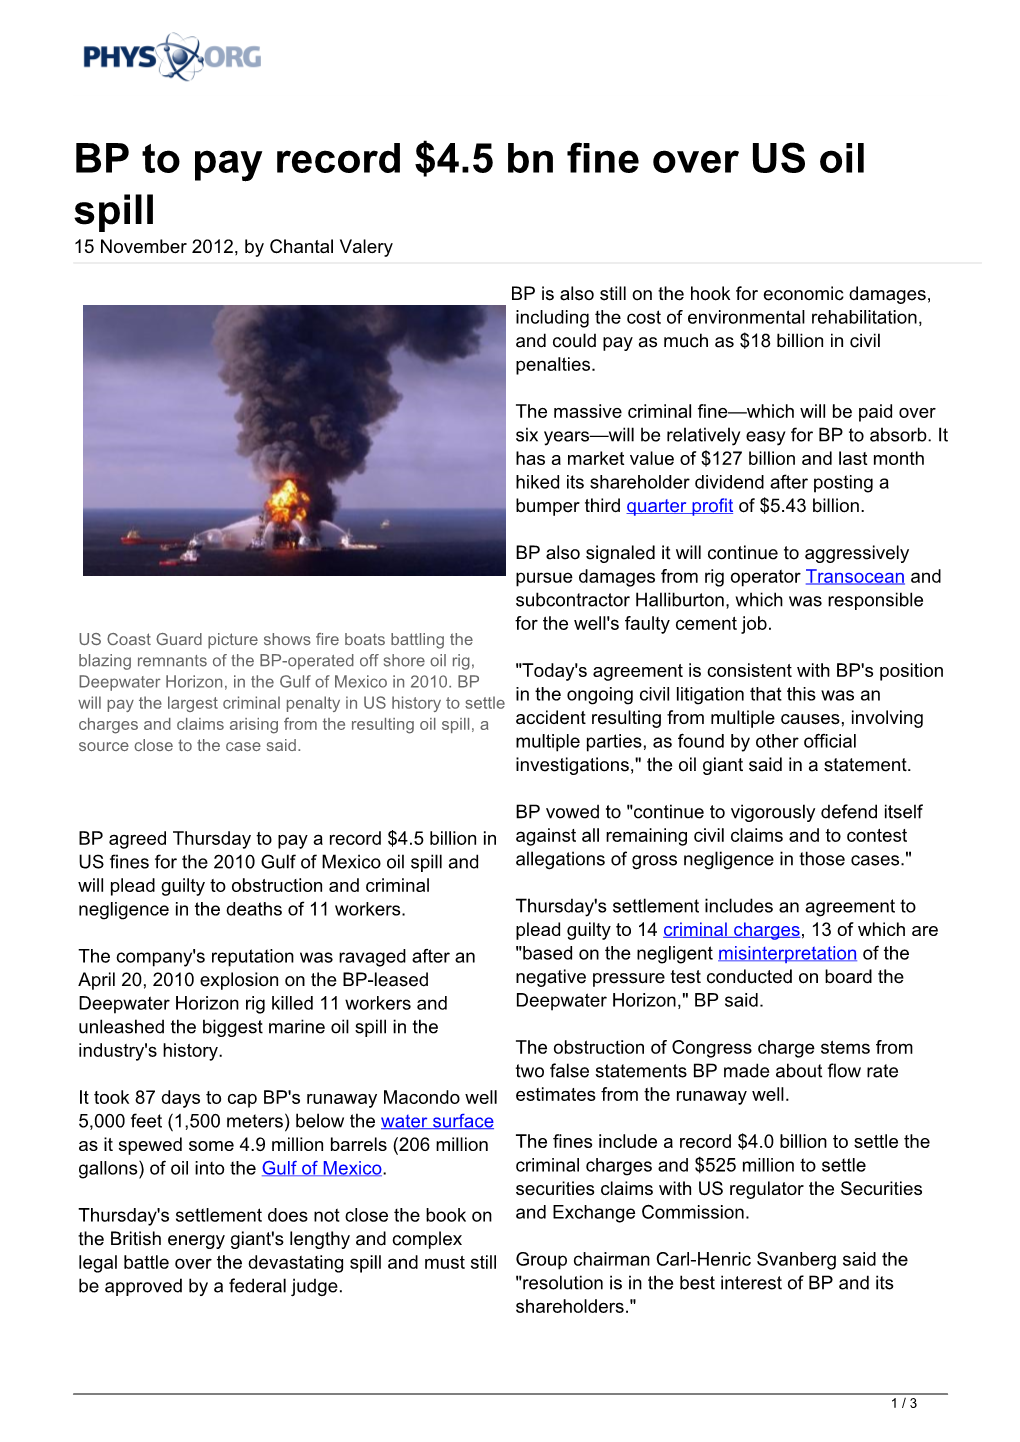 BP to Pay Record $4.5 Bn Fine Over US Oil Spill 15 November 2012, by Chantal Valery